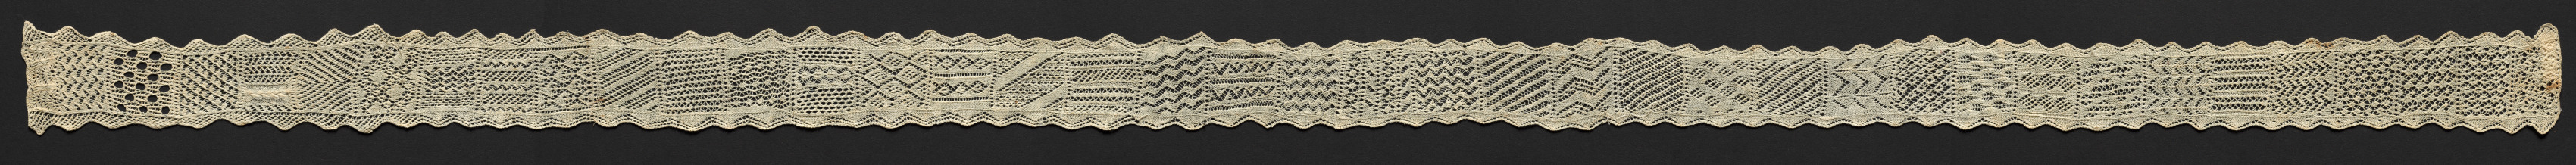 Knitted Lace Sampler